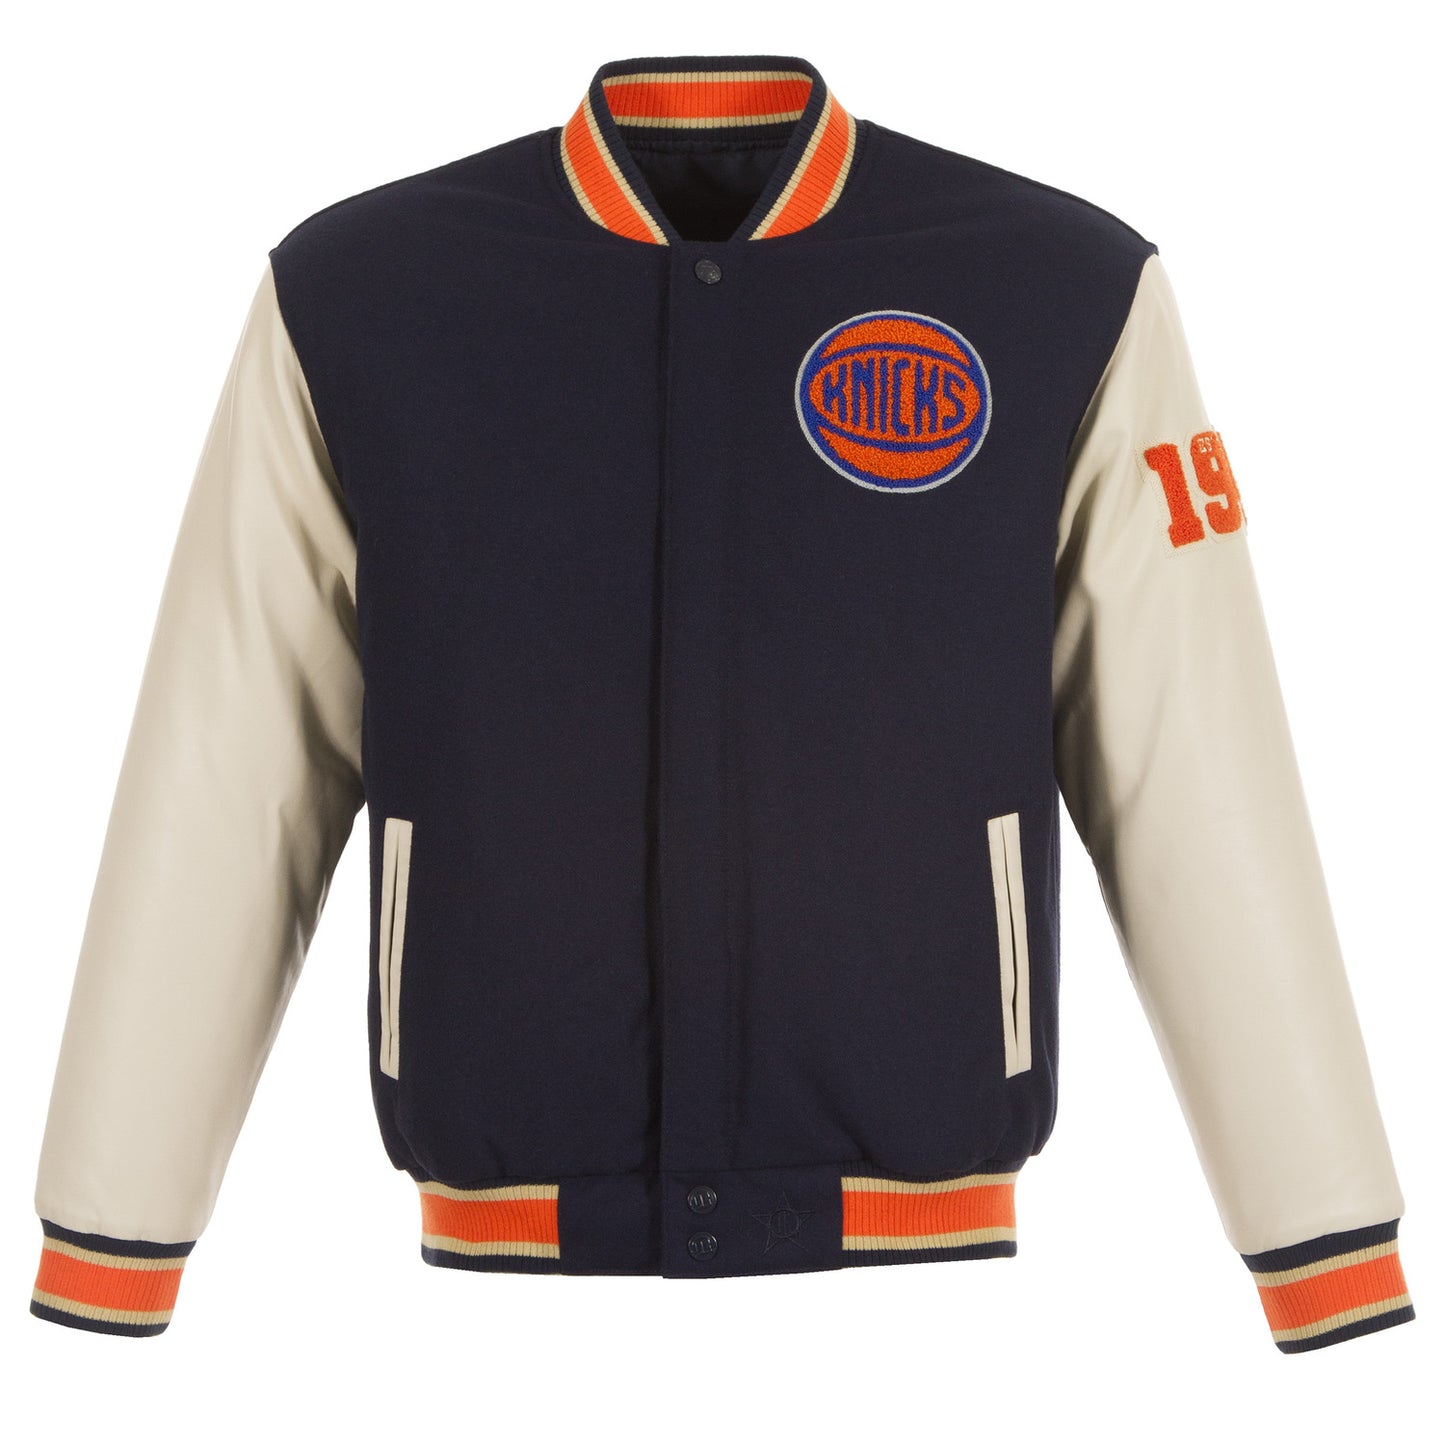 JH Design Knicks Reversible Chenille Wool Jacket - Front View